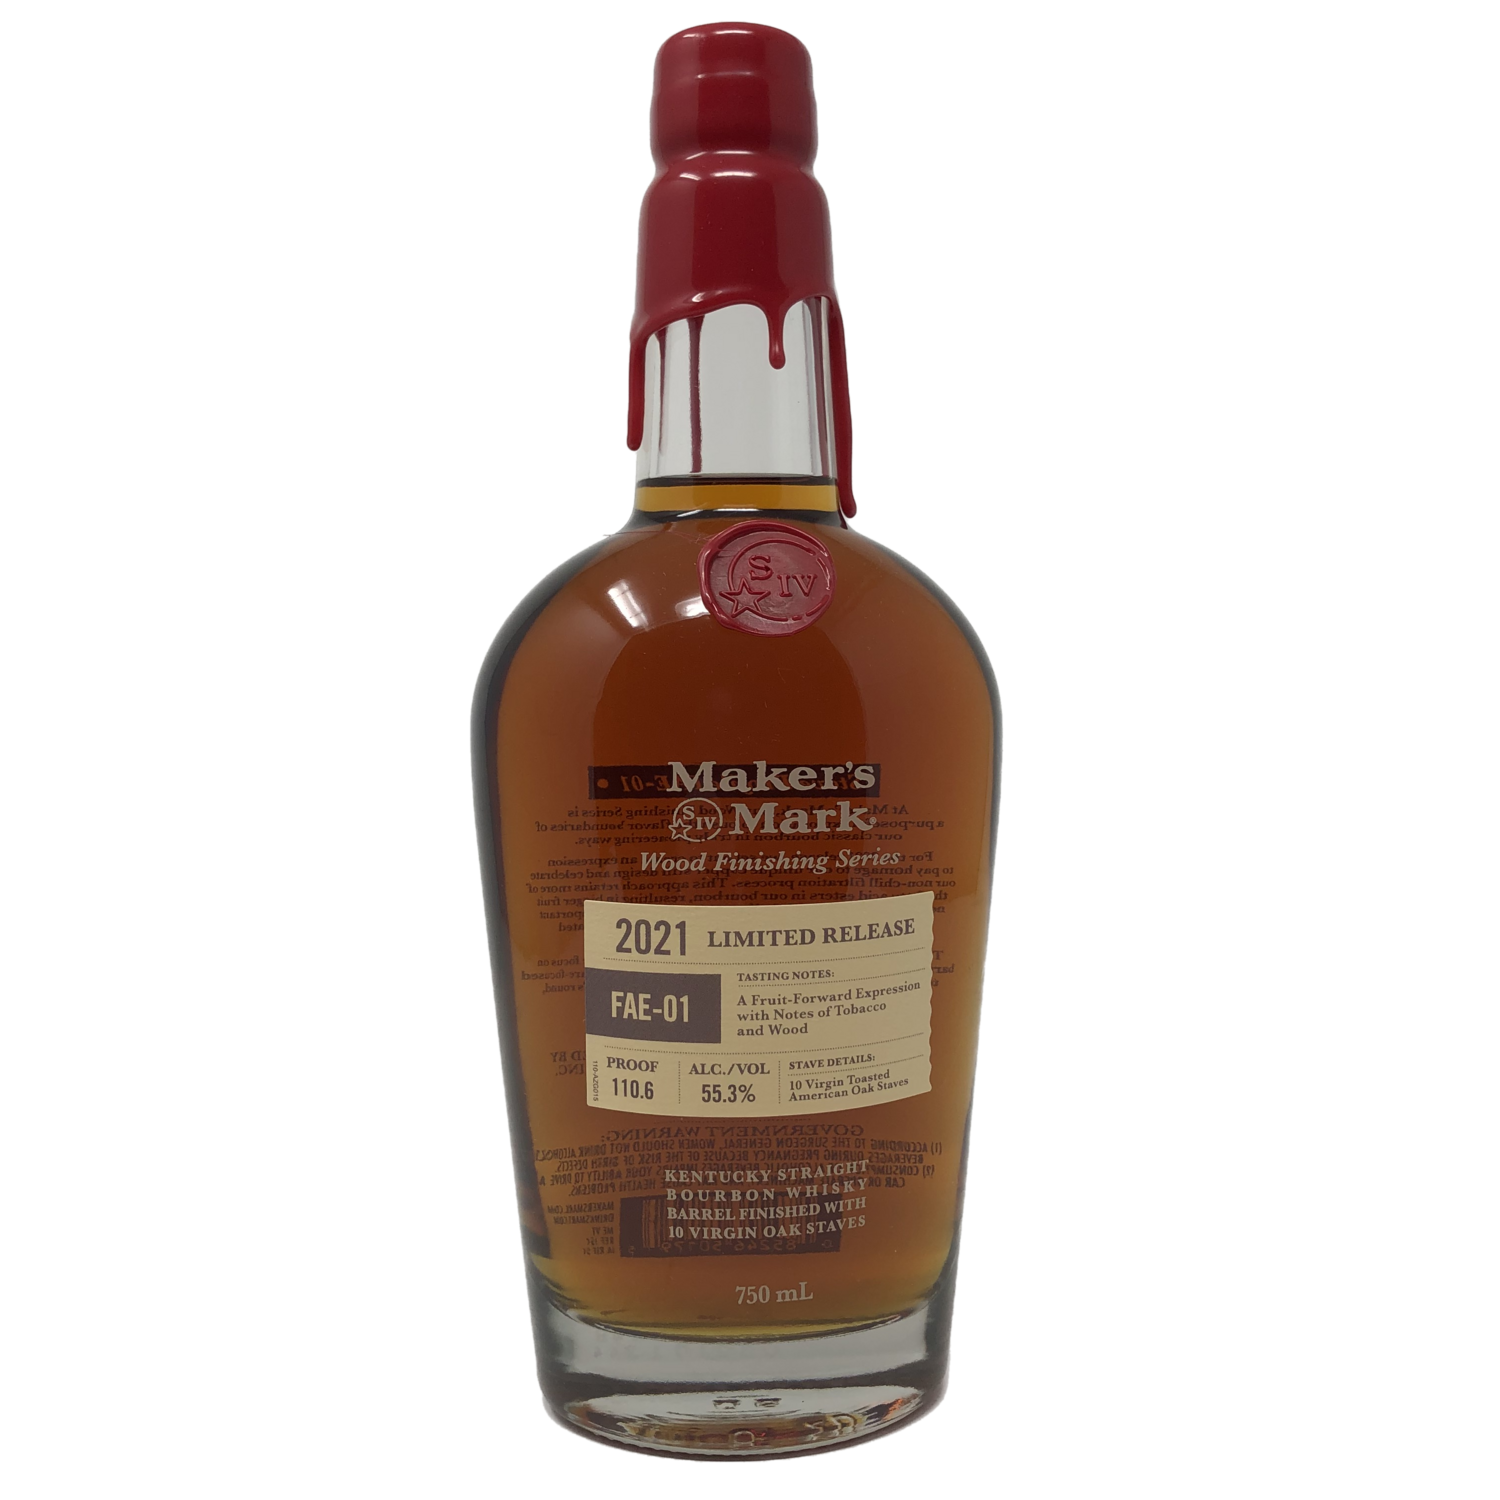 Maker's Mark Wood Finishing Series Limited Release FAE-01 Kentucky Straight Bourbon Whisky (2021 Edition)